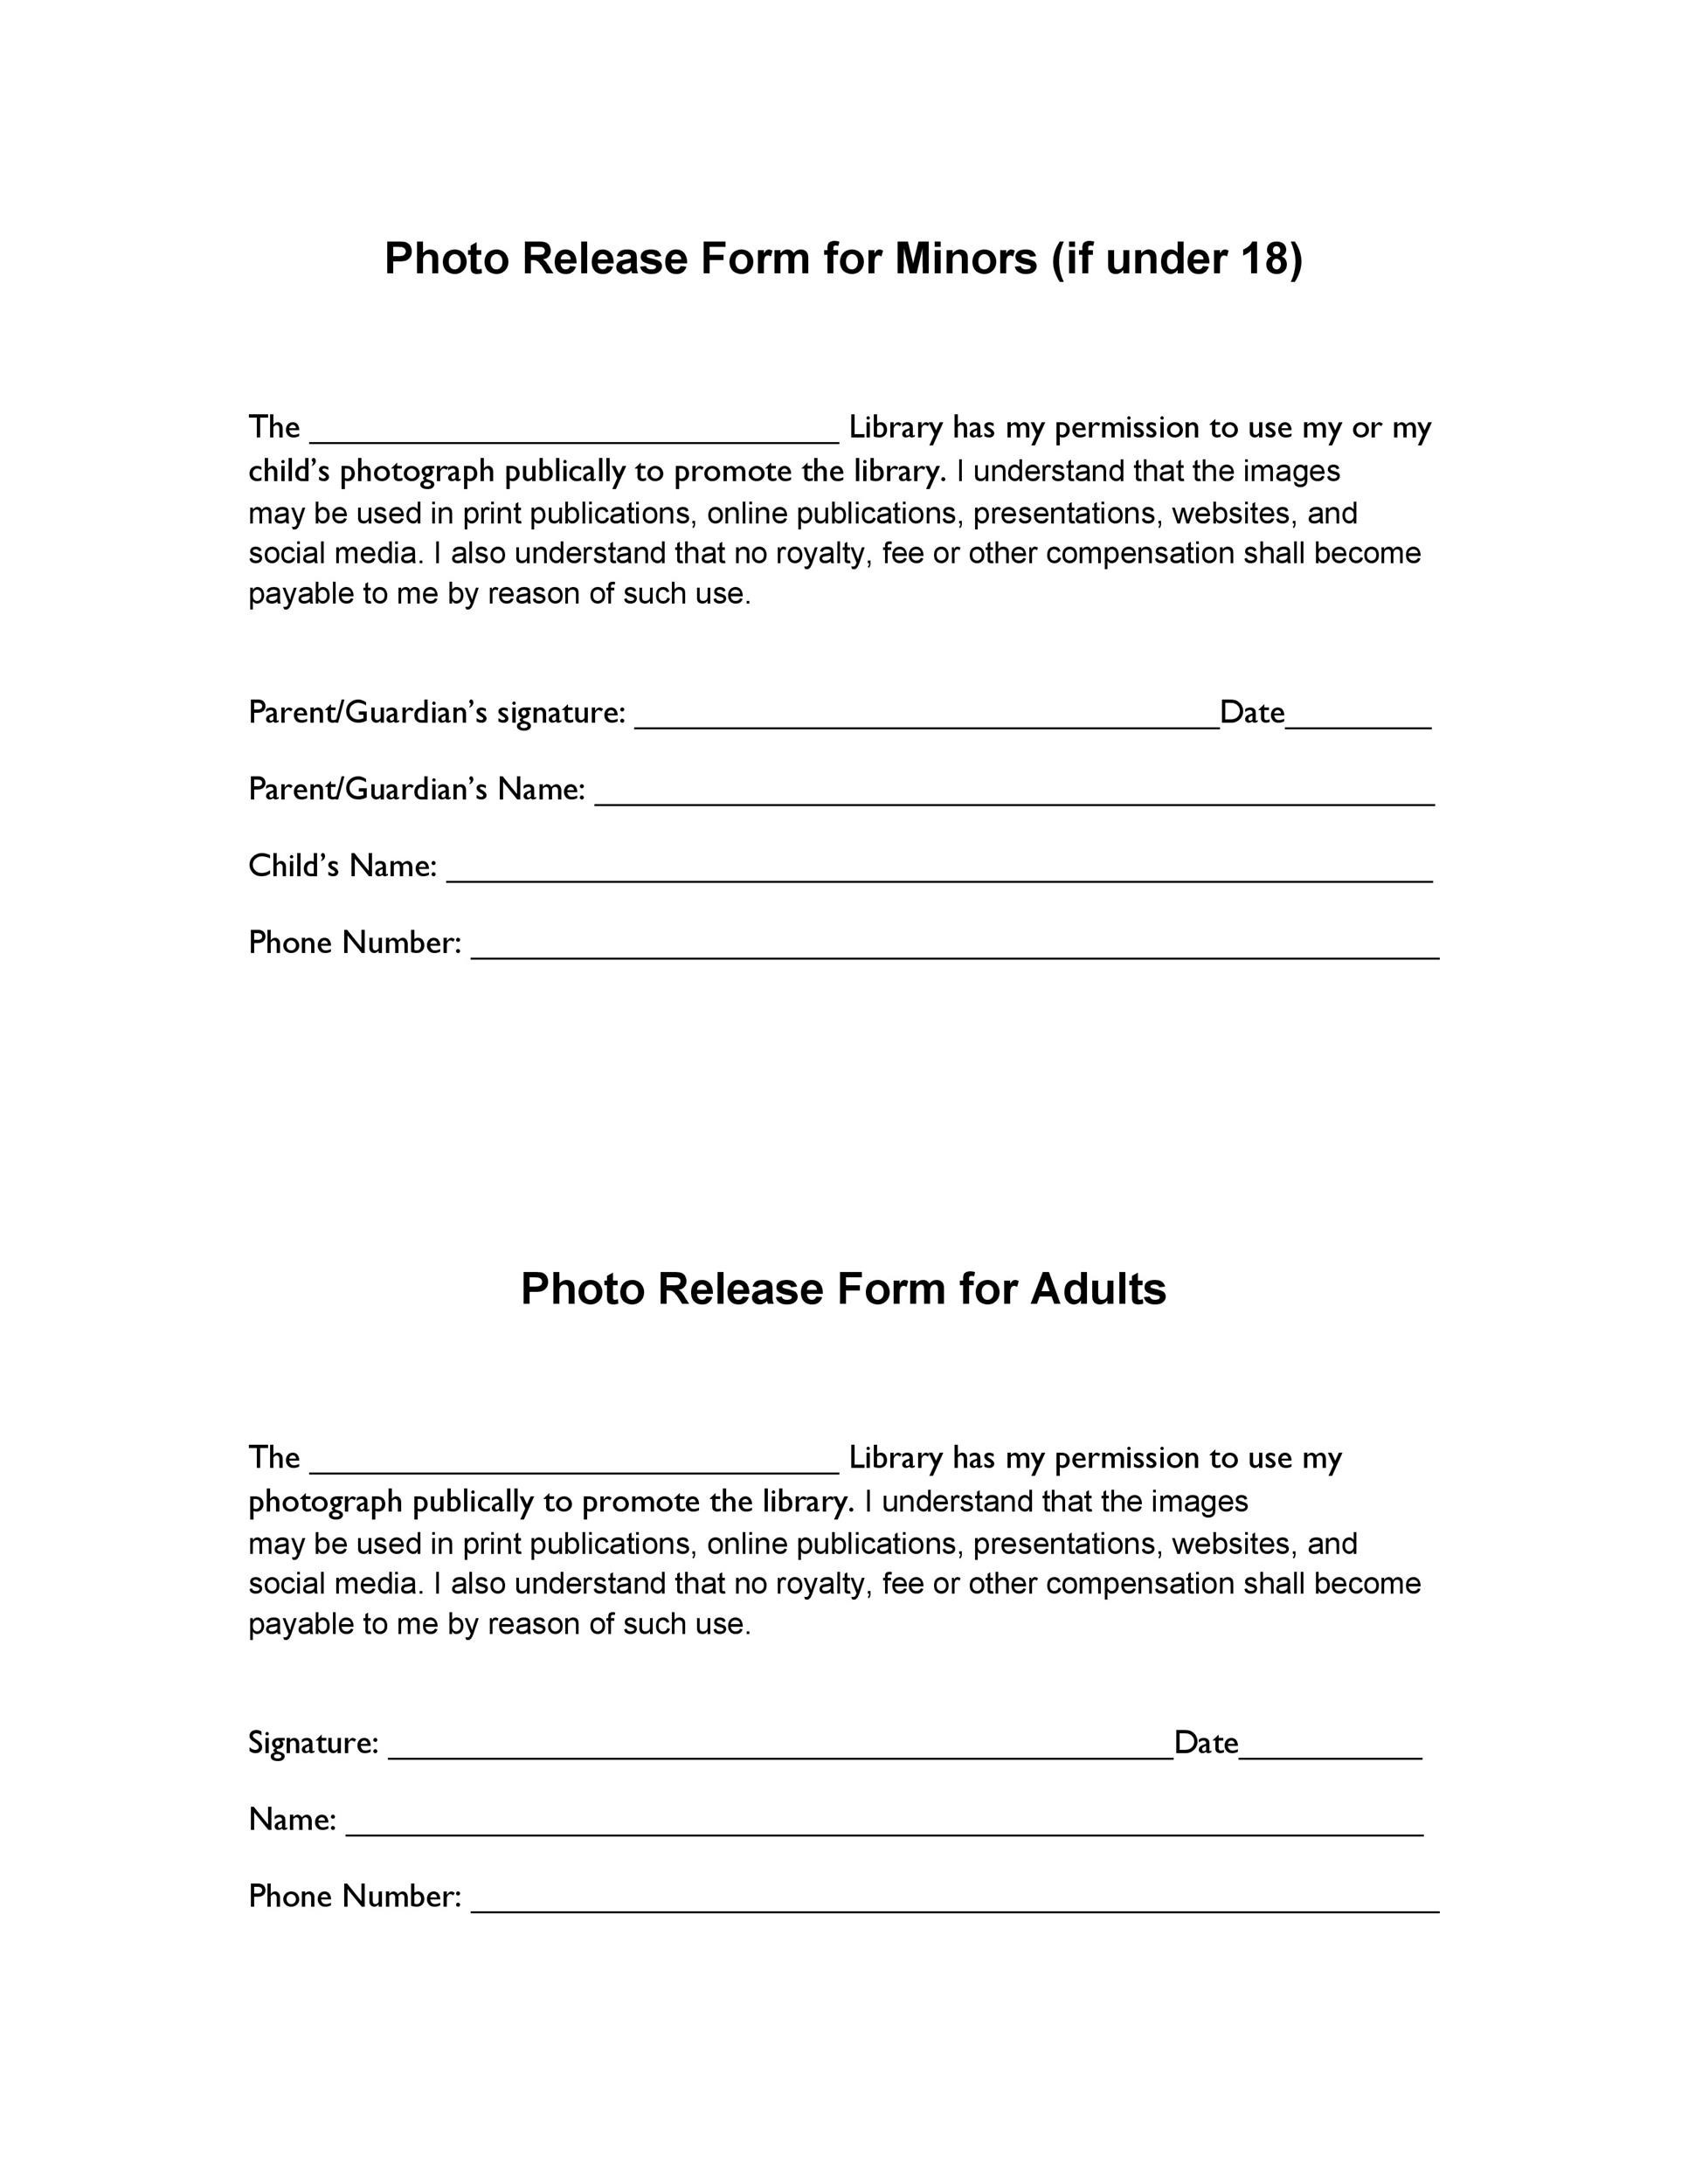 53 FREE Photo Release Form Templates Word PDF 